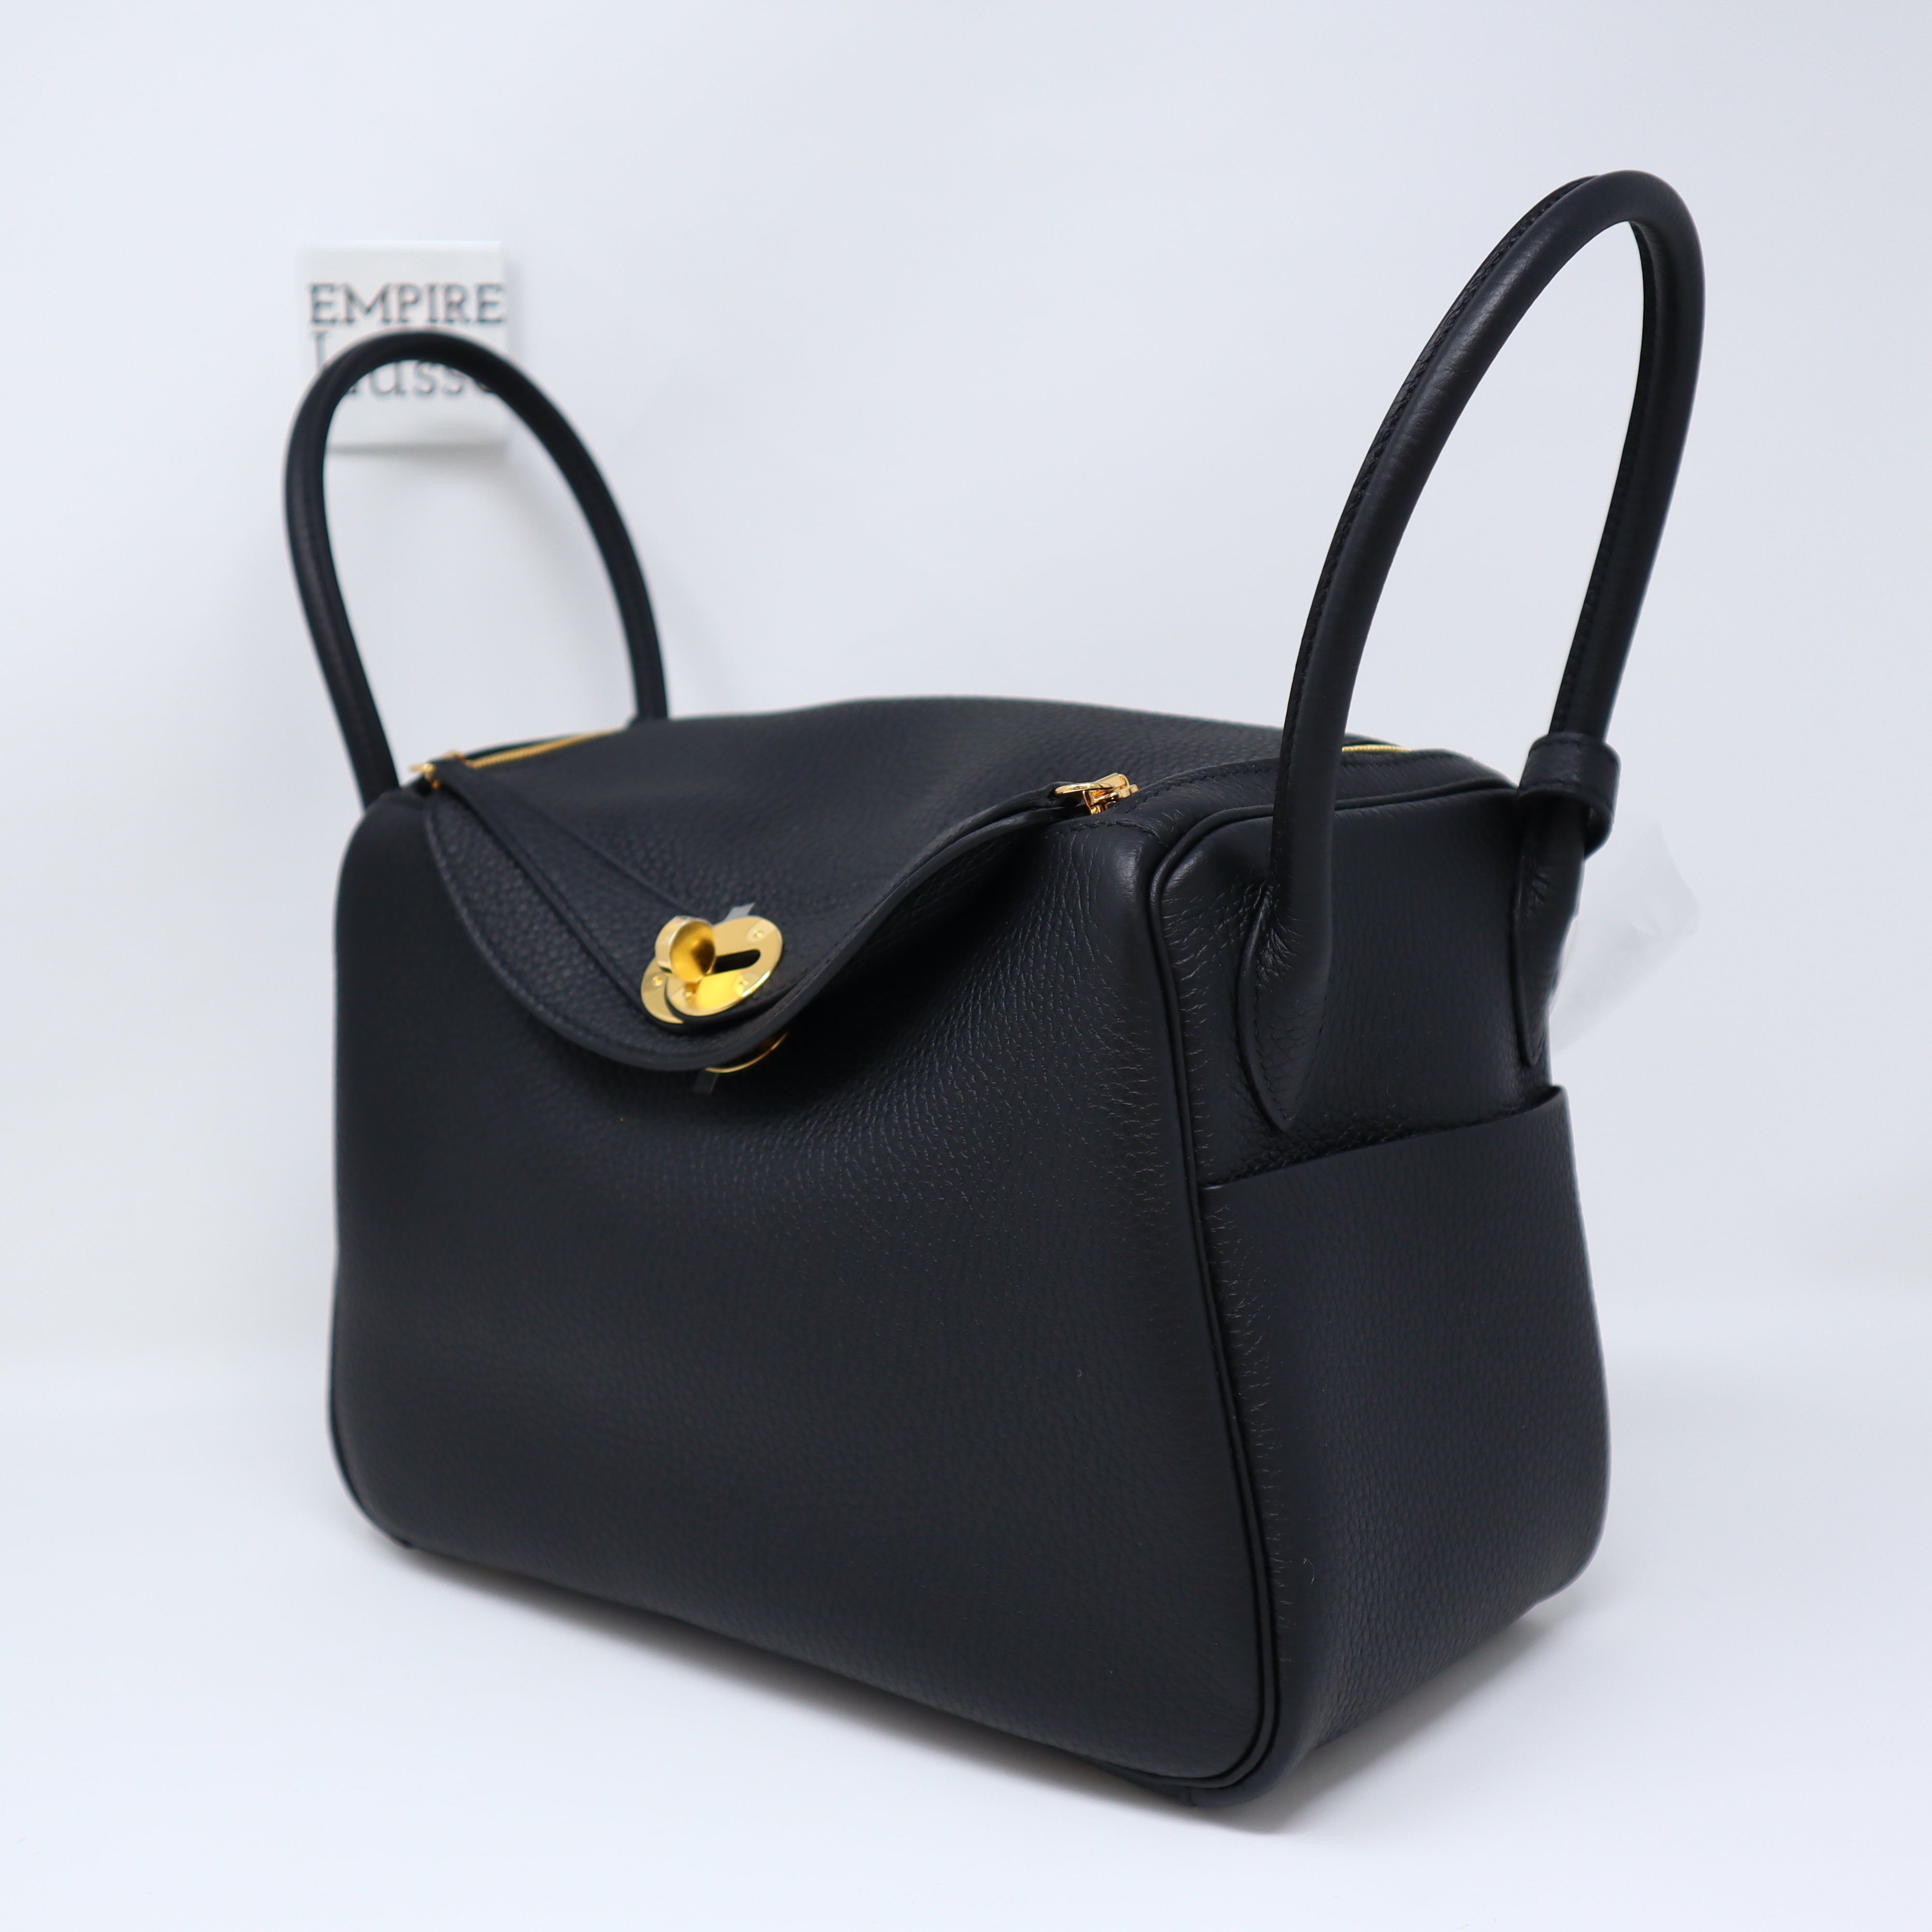 NEW HERMES LINDY 26 BLACK CLEMENCE LEATHER GOLD HARDWARE GHW HOT